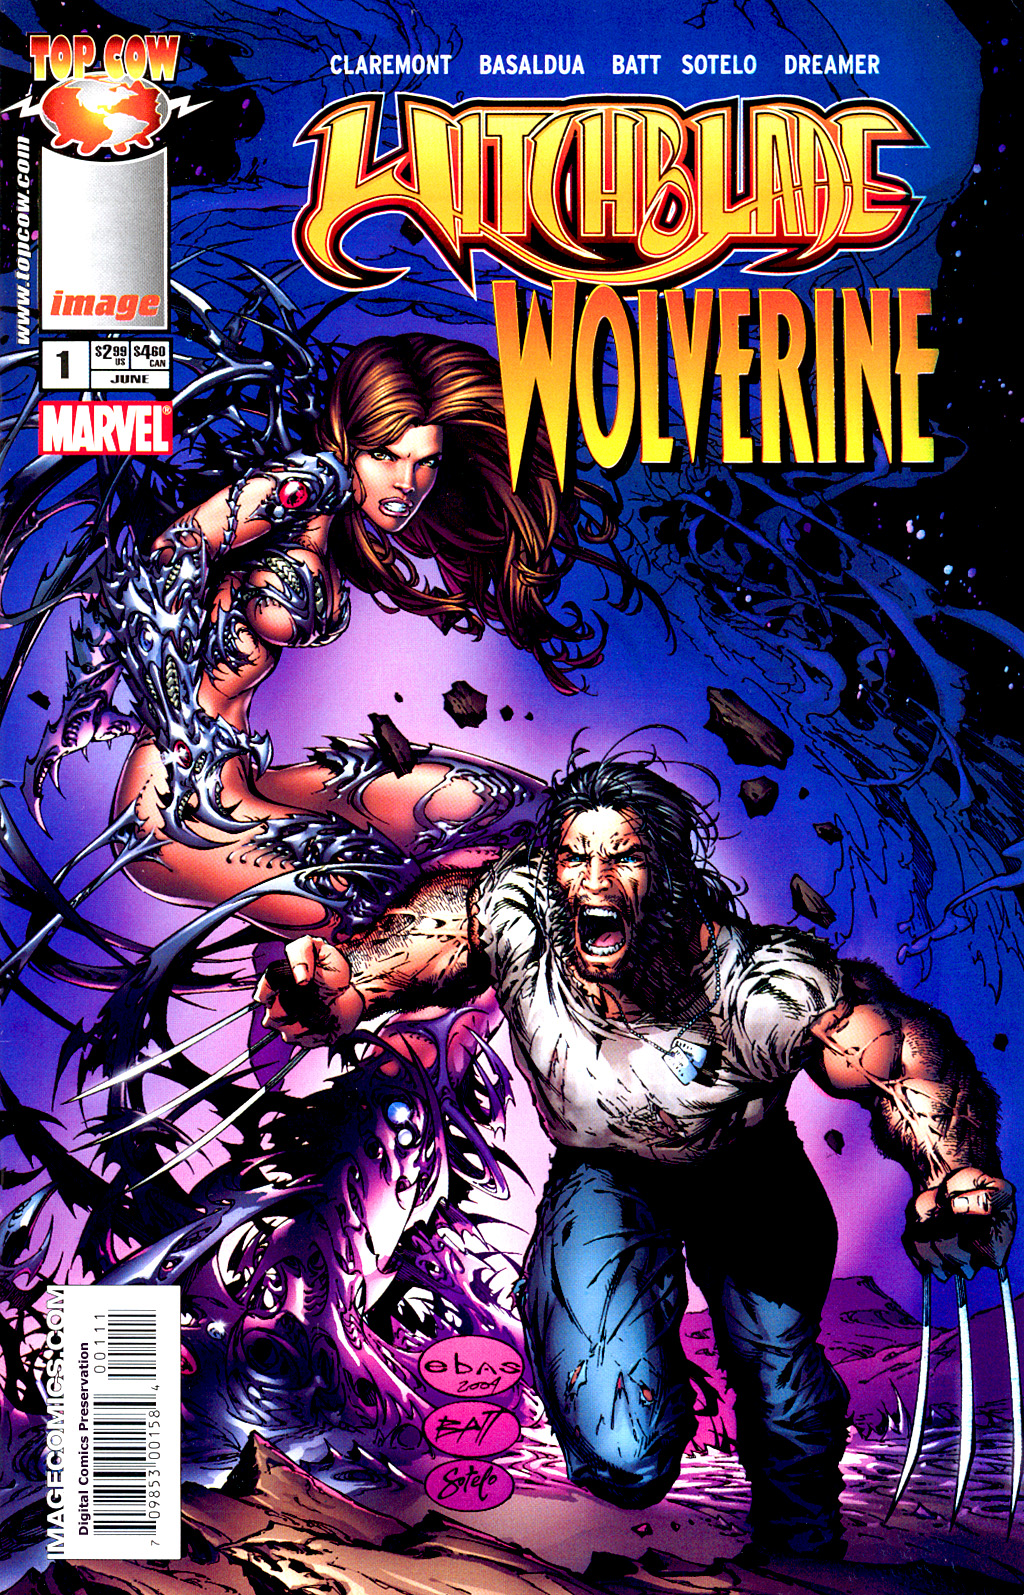 Read online Witchblade/Wolverine comic -  Issue # Full - 1